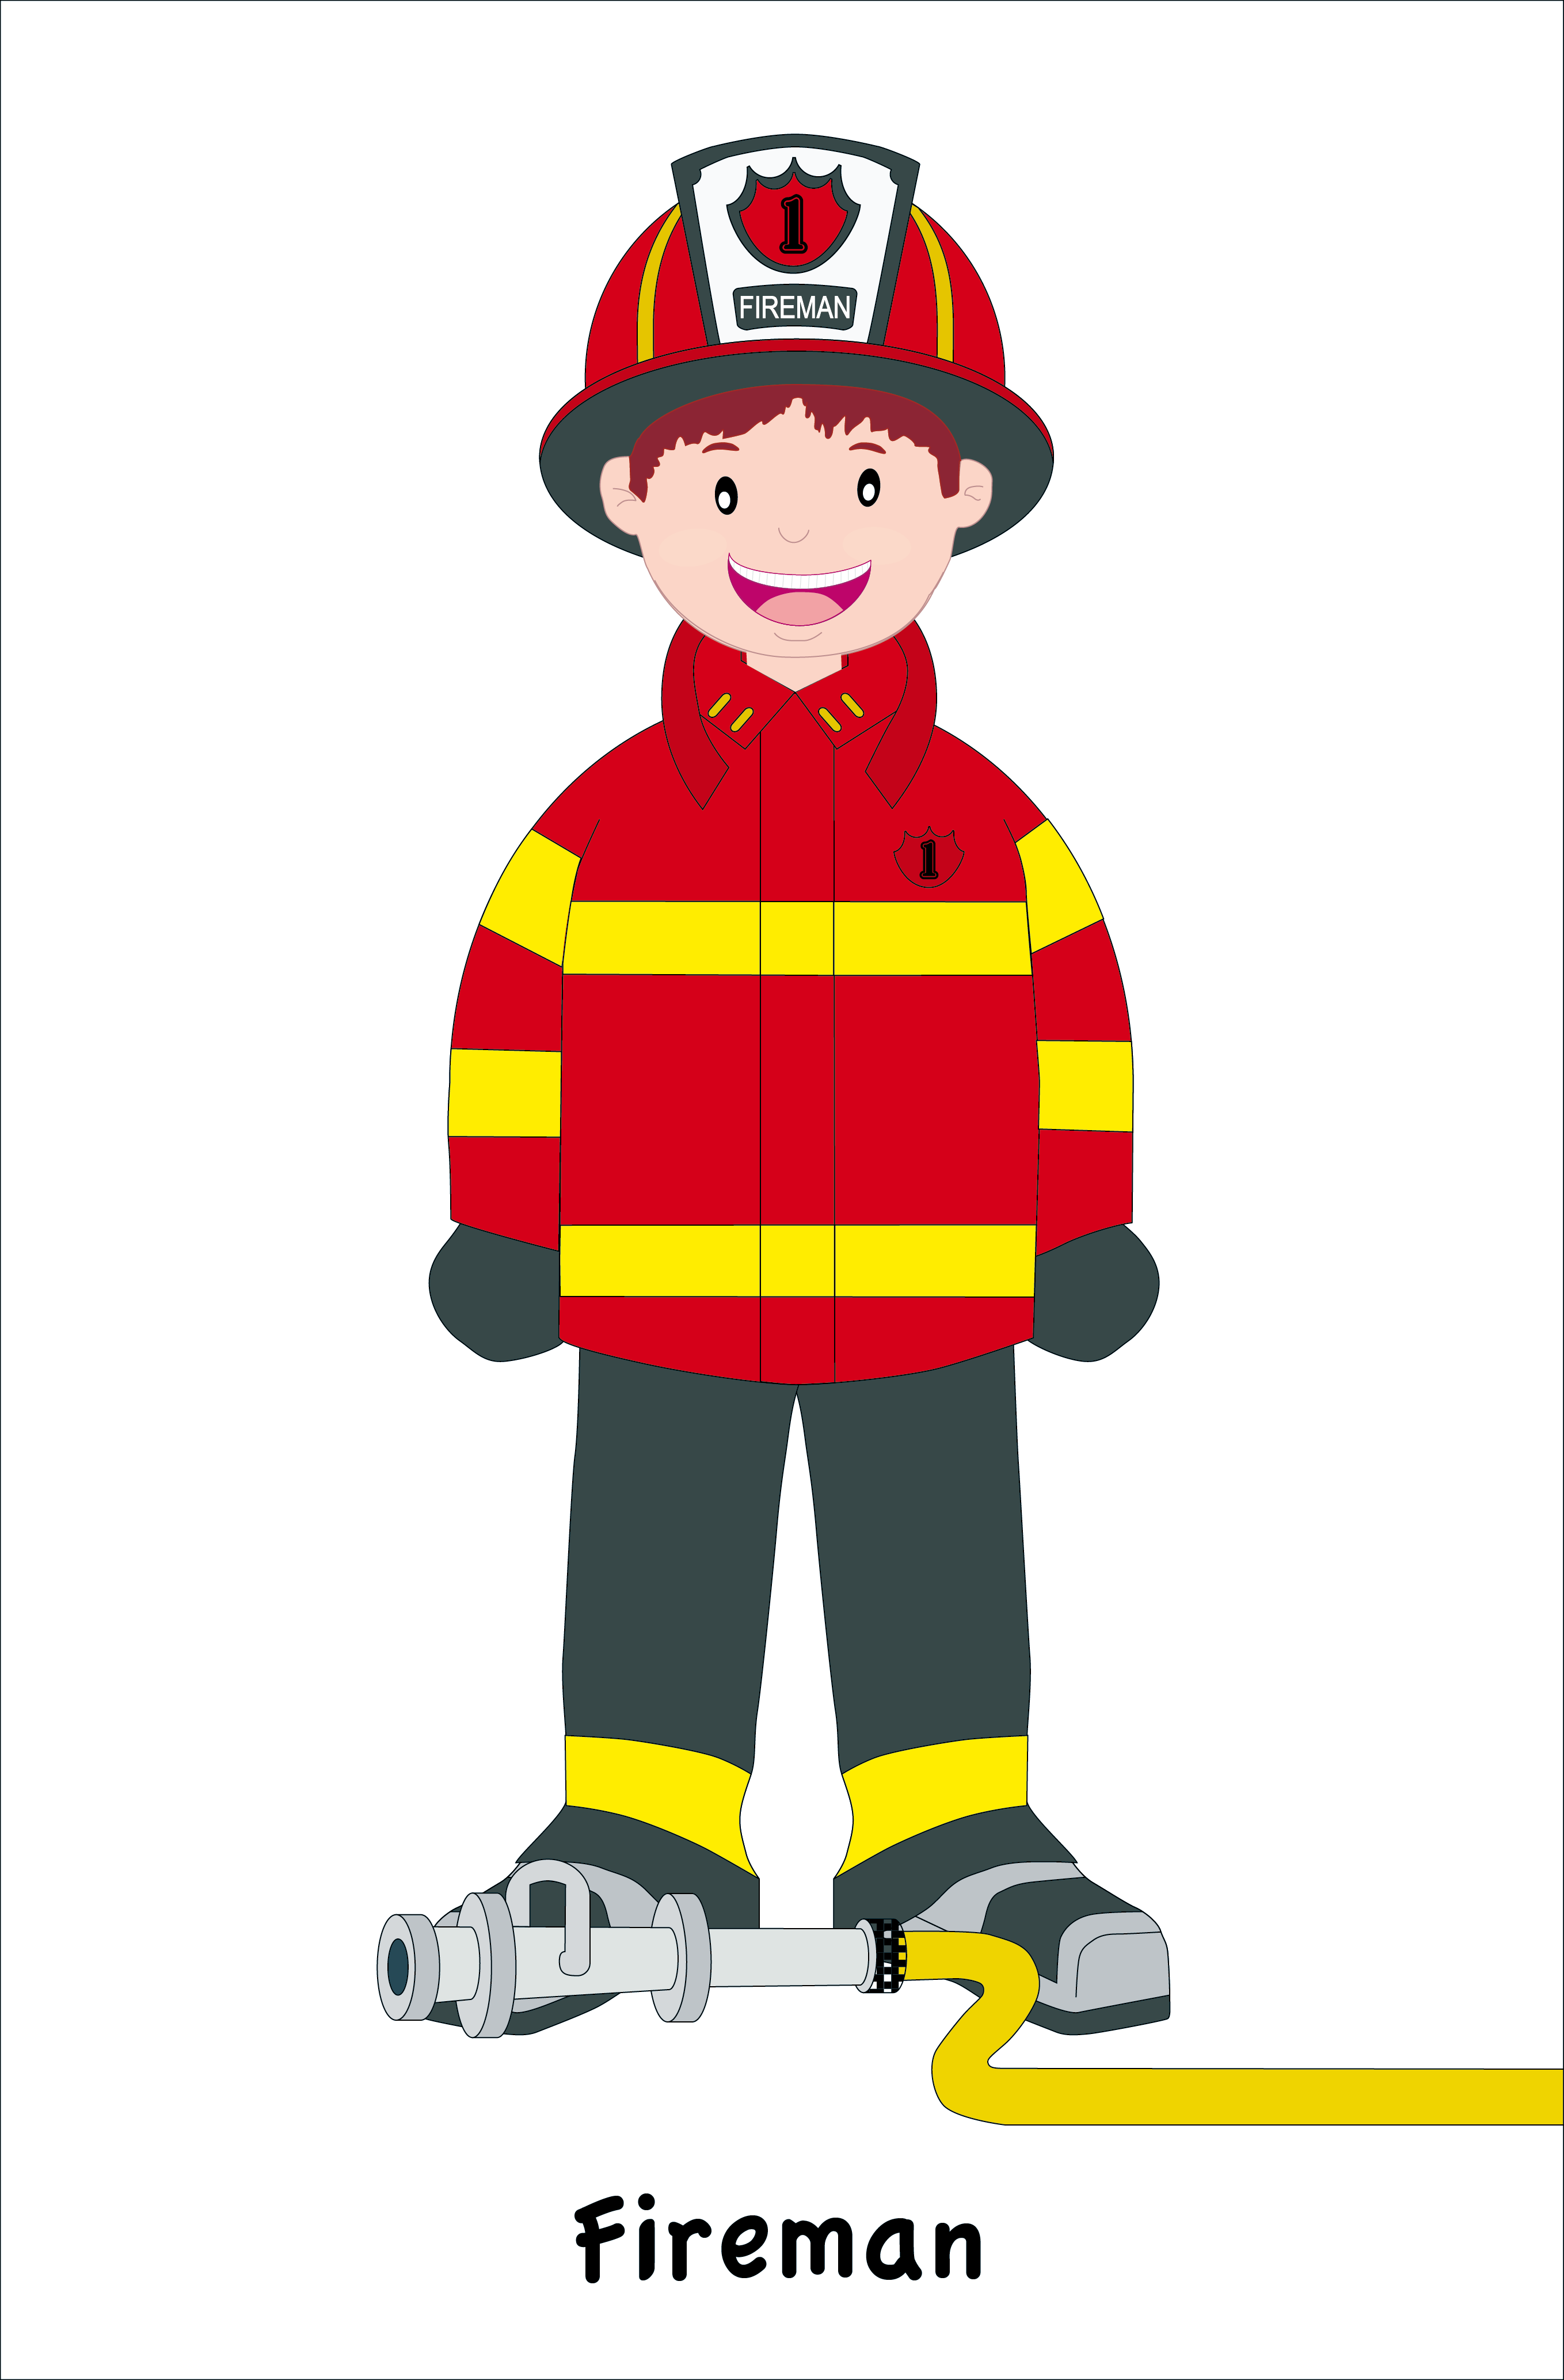 Fireman Clipart The Cliparts Databases 4 Cliparting Com Firefighter black and white pwhu images on firefighter clipart firemen | firefighter crafts, firefighter clipart, fire safety preschool. fireman clipart the cliparts databases